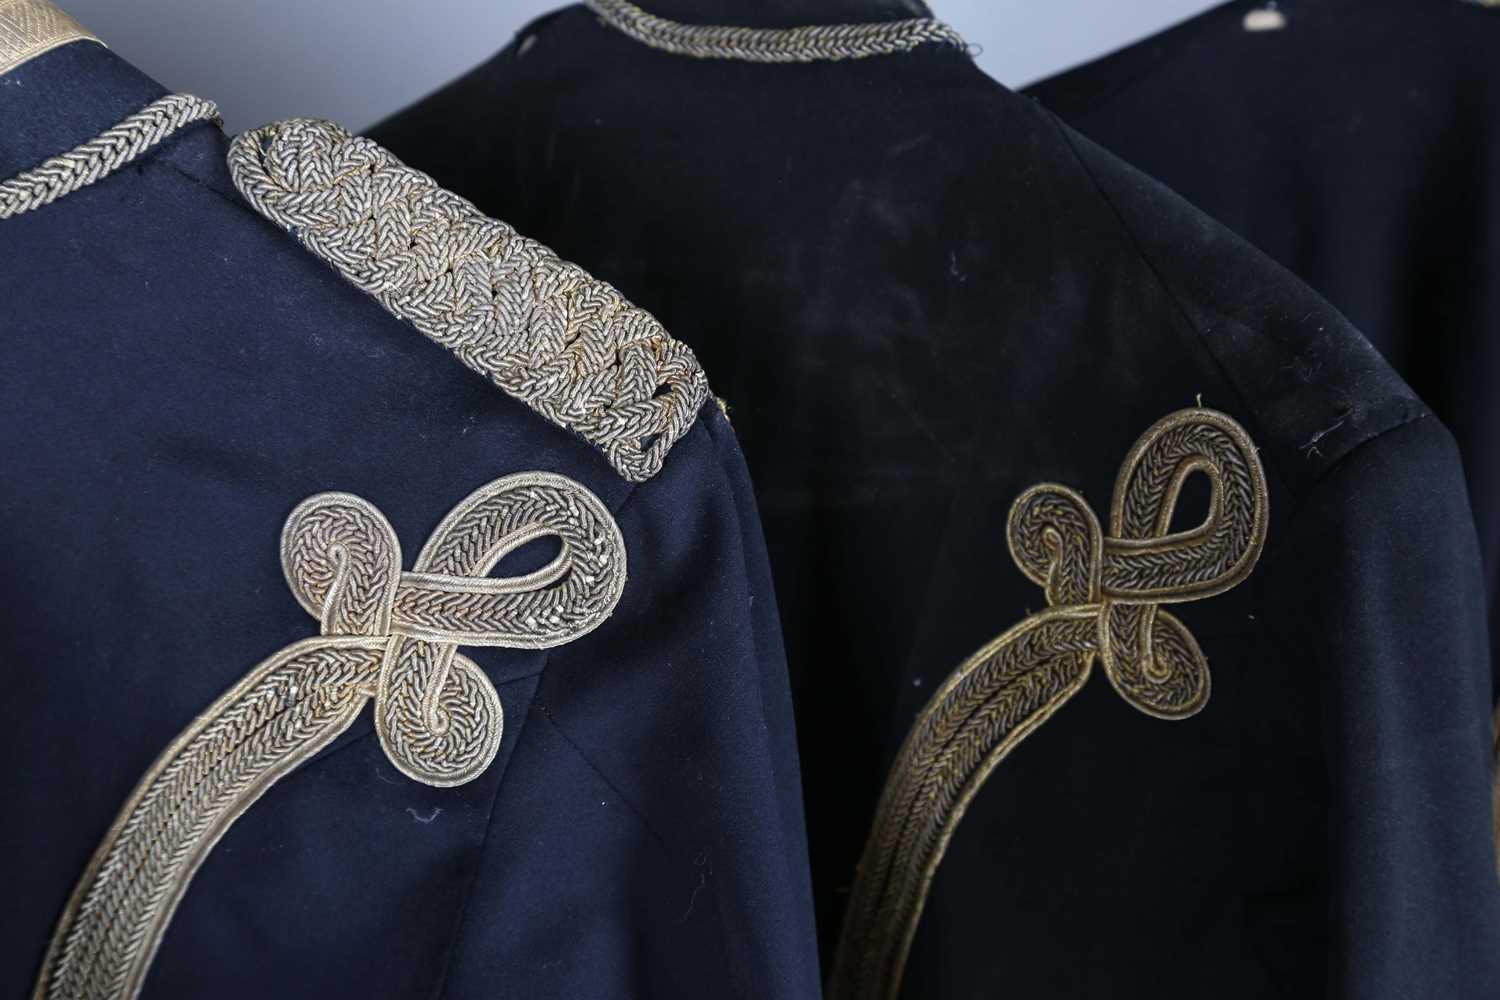 A group of early 20th century officer's dress tunics with bullion-embroidered decoration and rank - Image 21 of 23